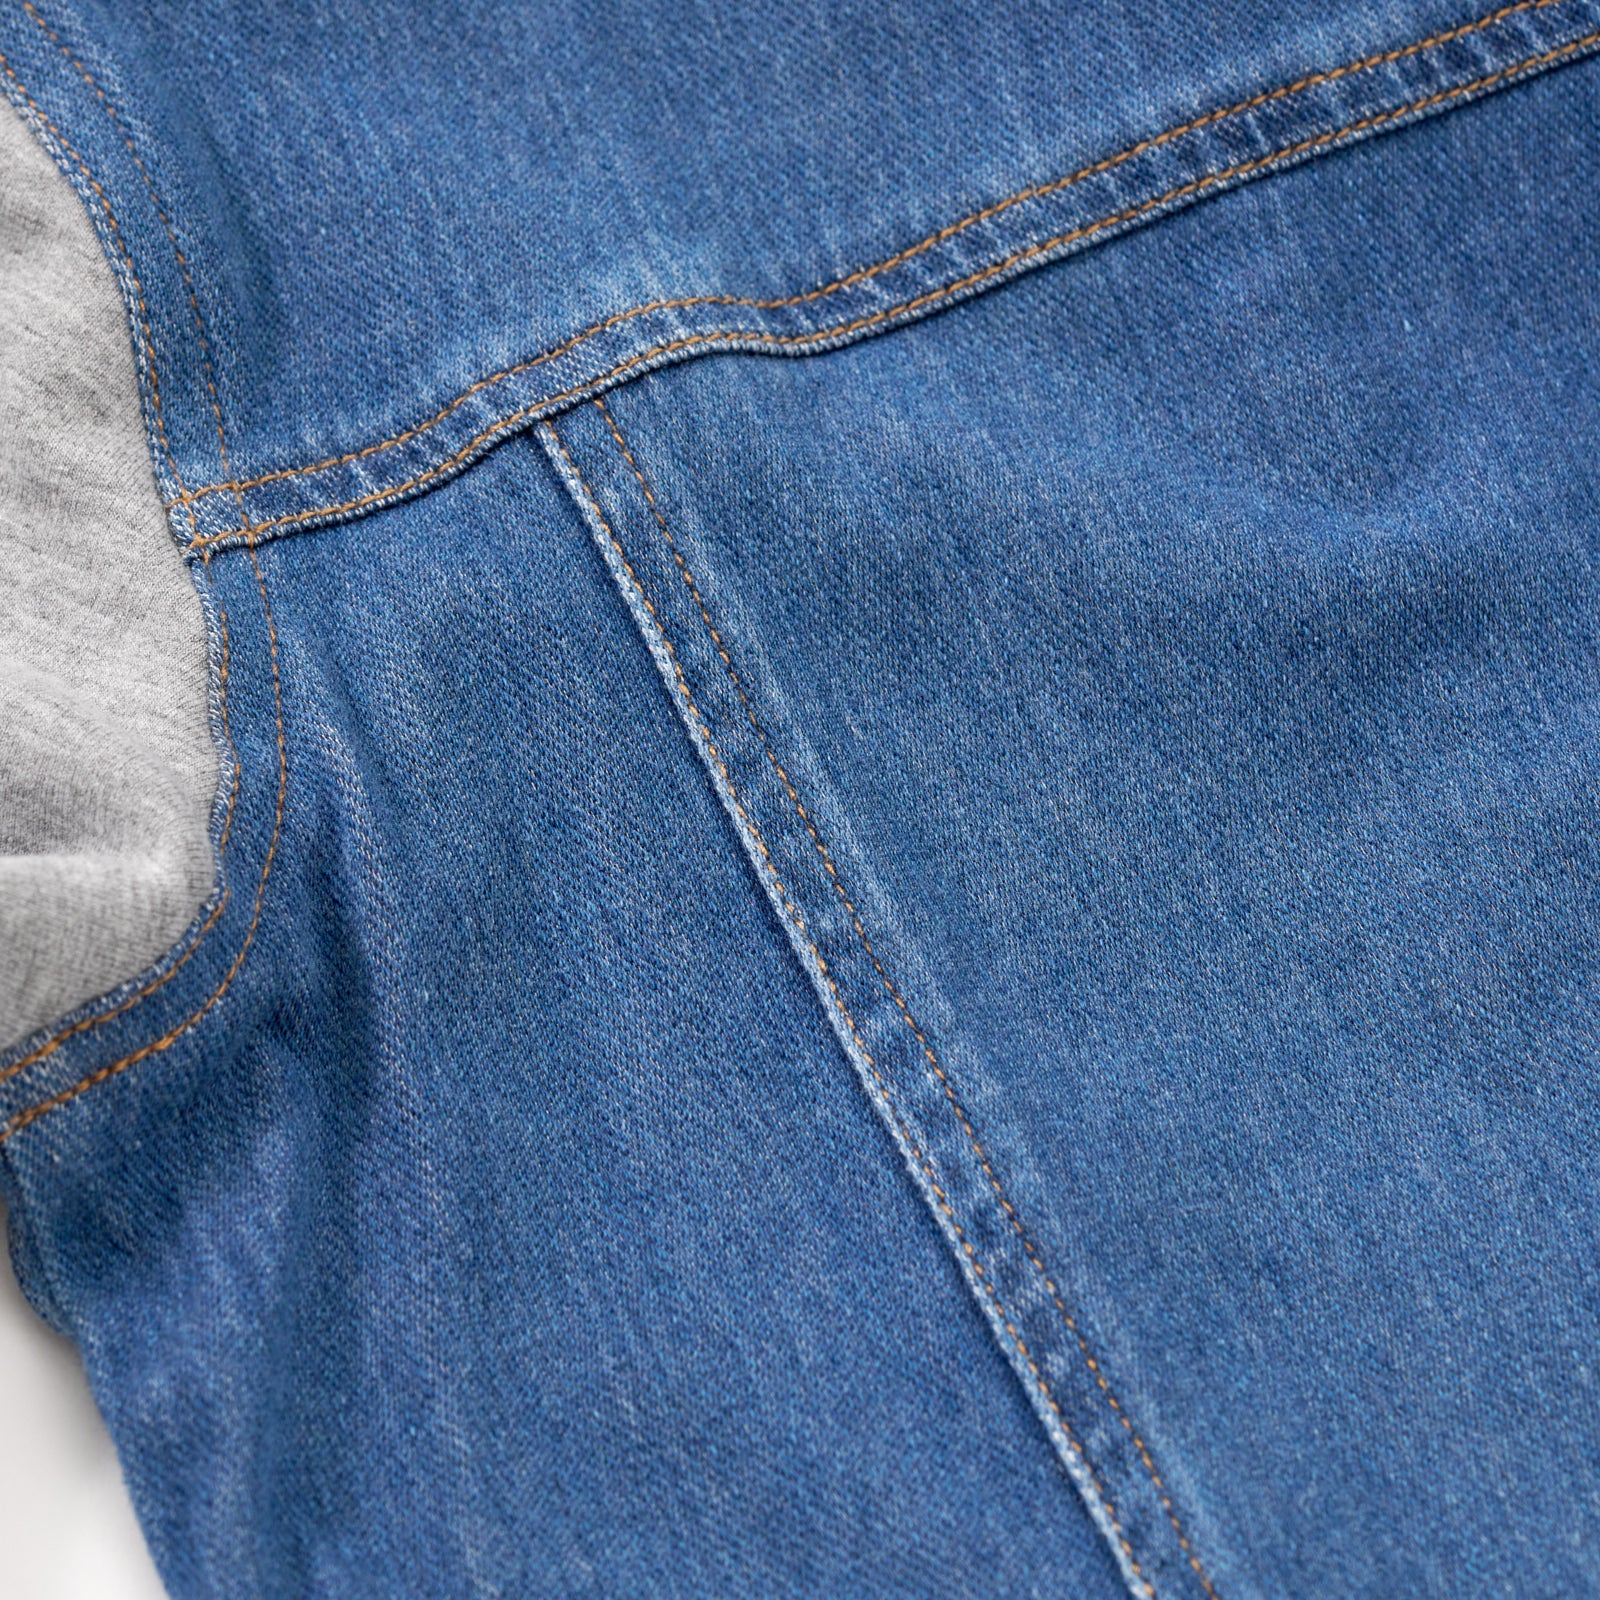 Close up image of the back seam details on the Midwash Blue/Gray Denim Jacket